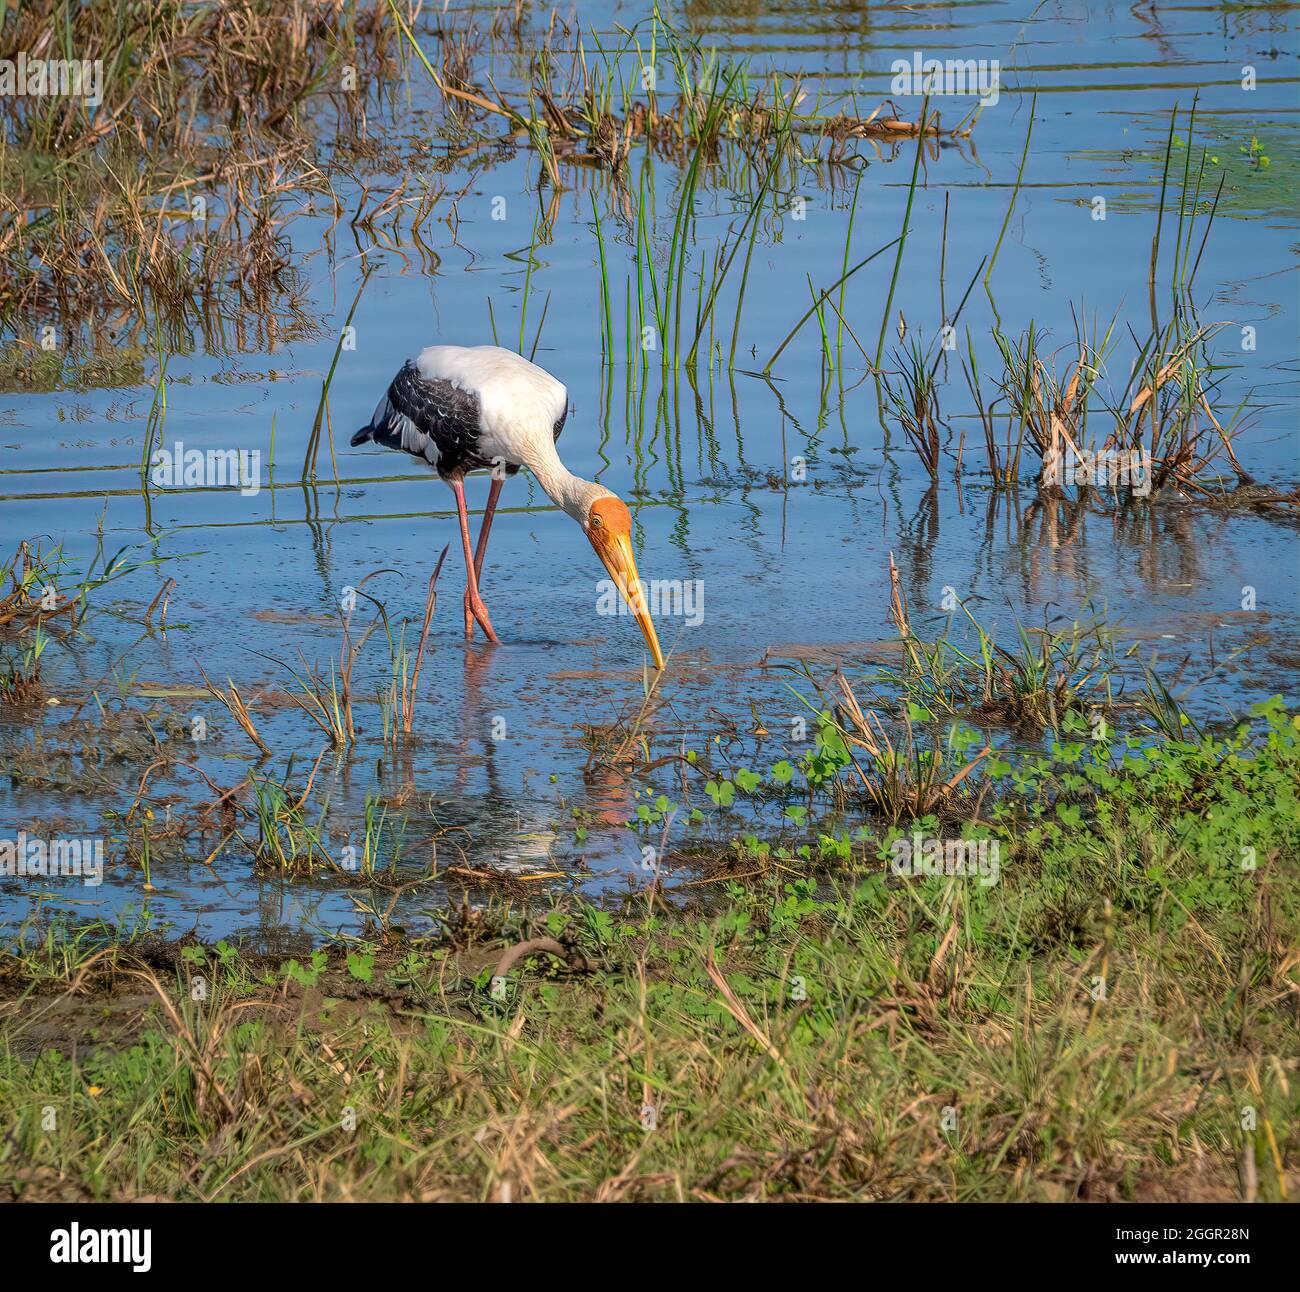 A colorful painted stork bird wading in the wetlands of Sri Lanka. Stock Photo